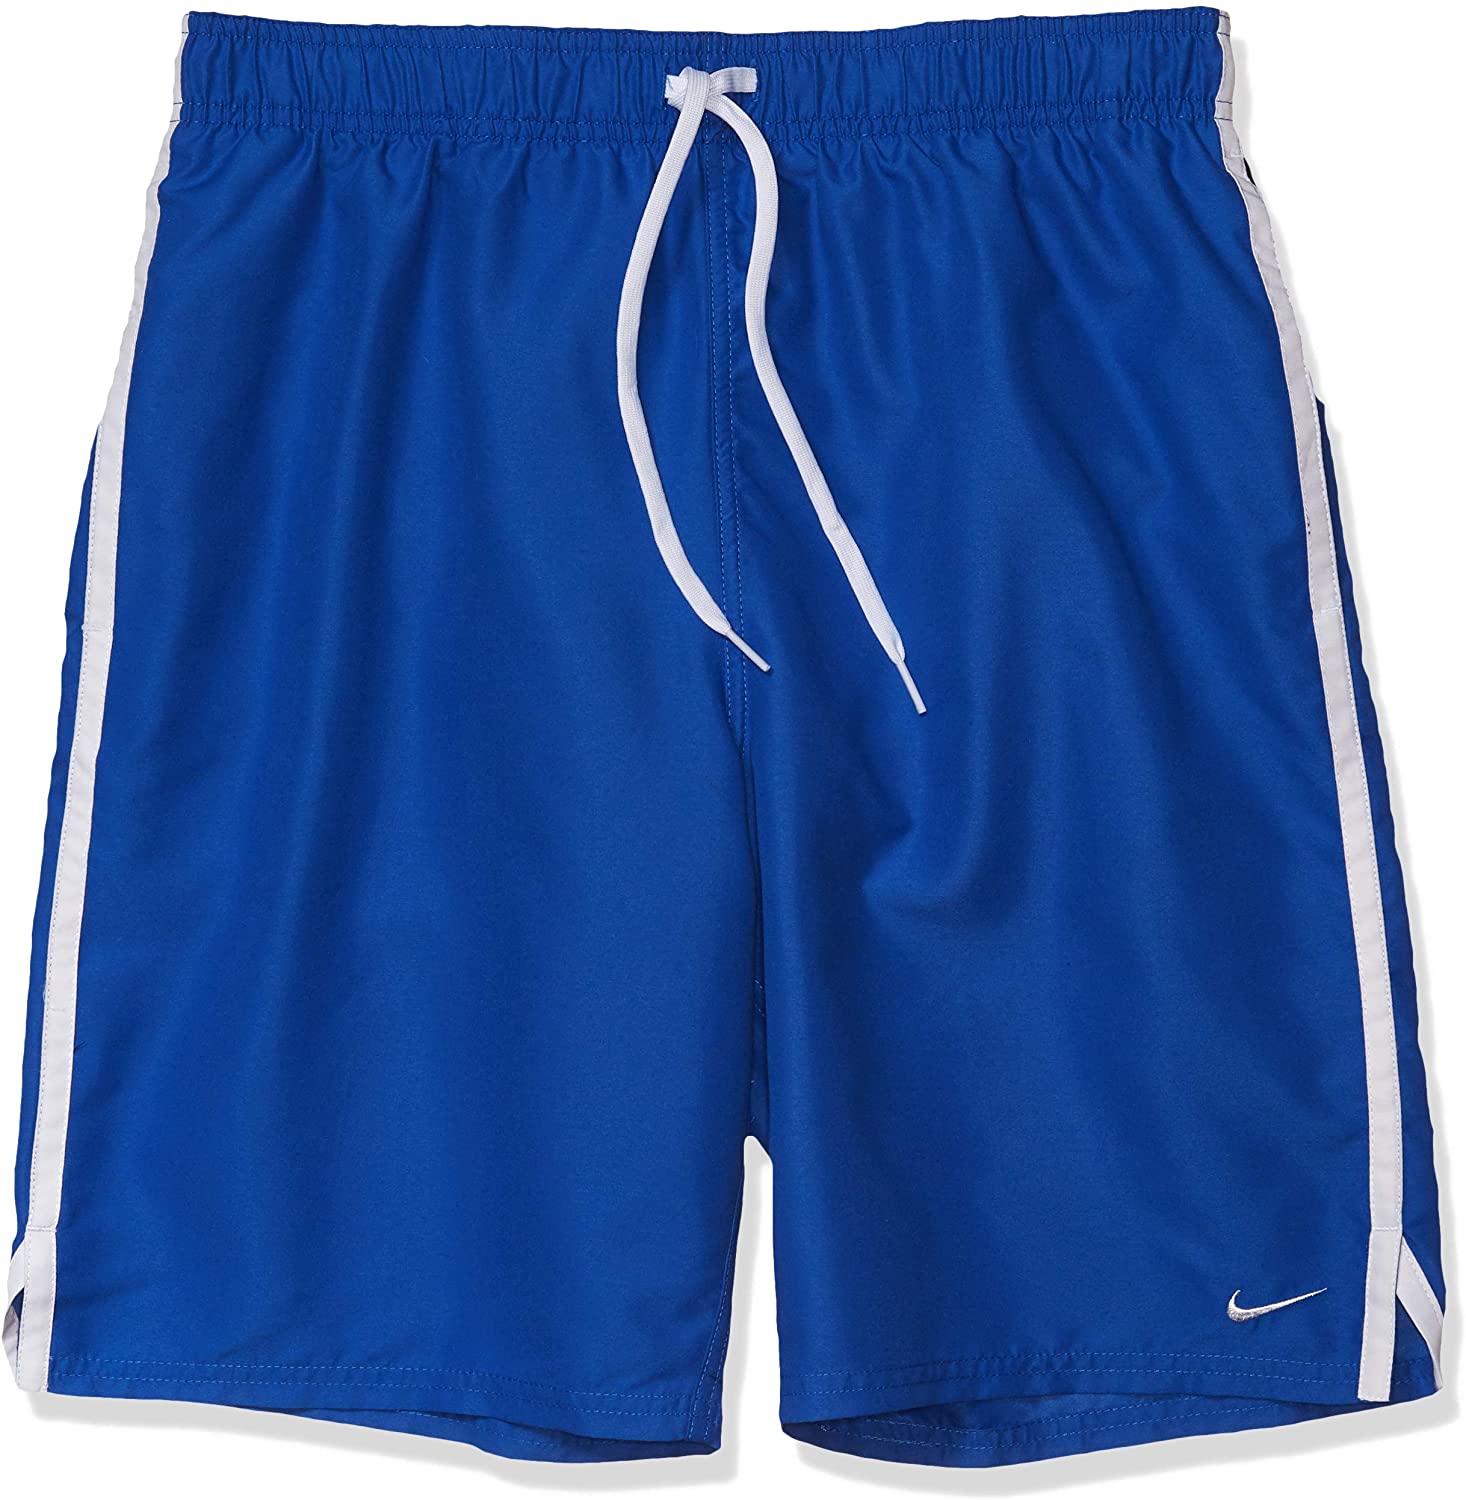 Men's Nike Diverge 9" Volley Short Swim Trunk in Game Royal color from the front